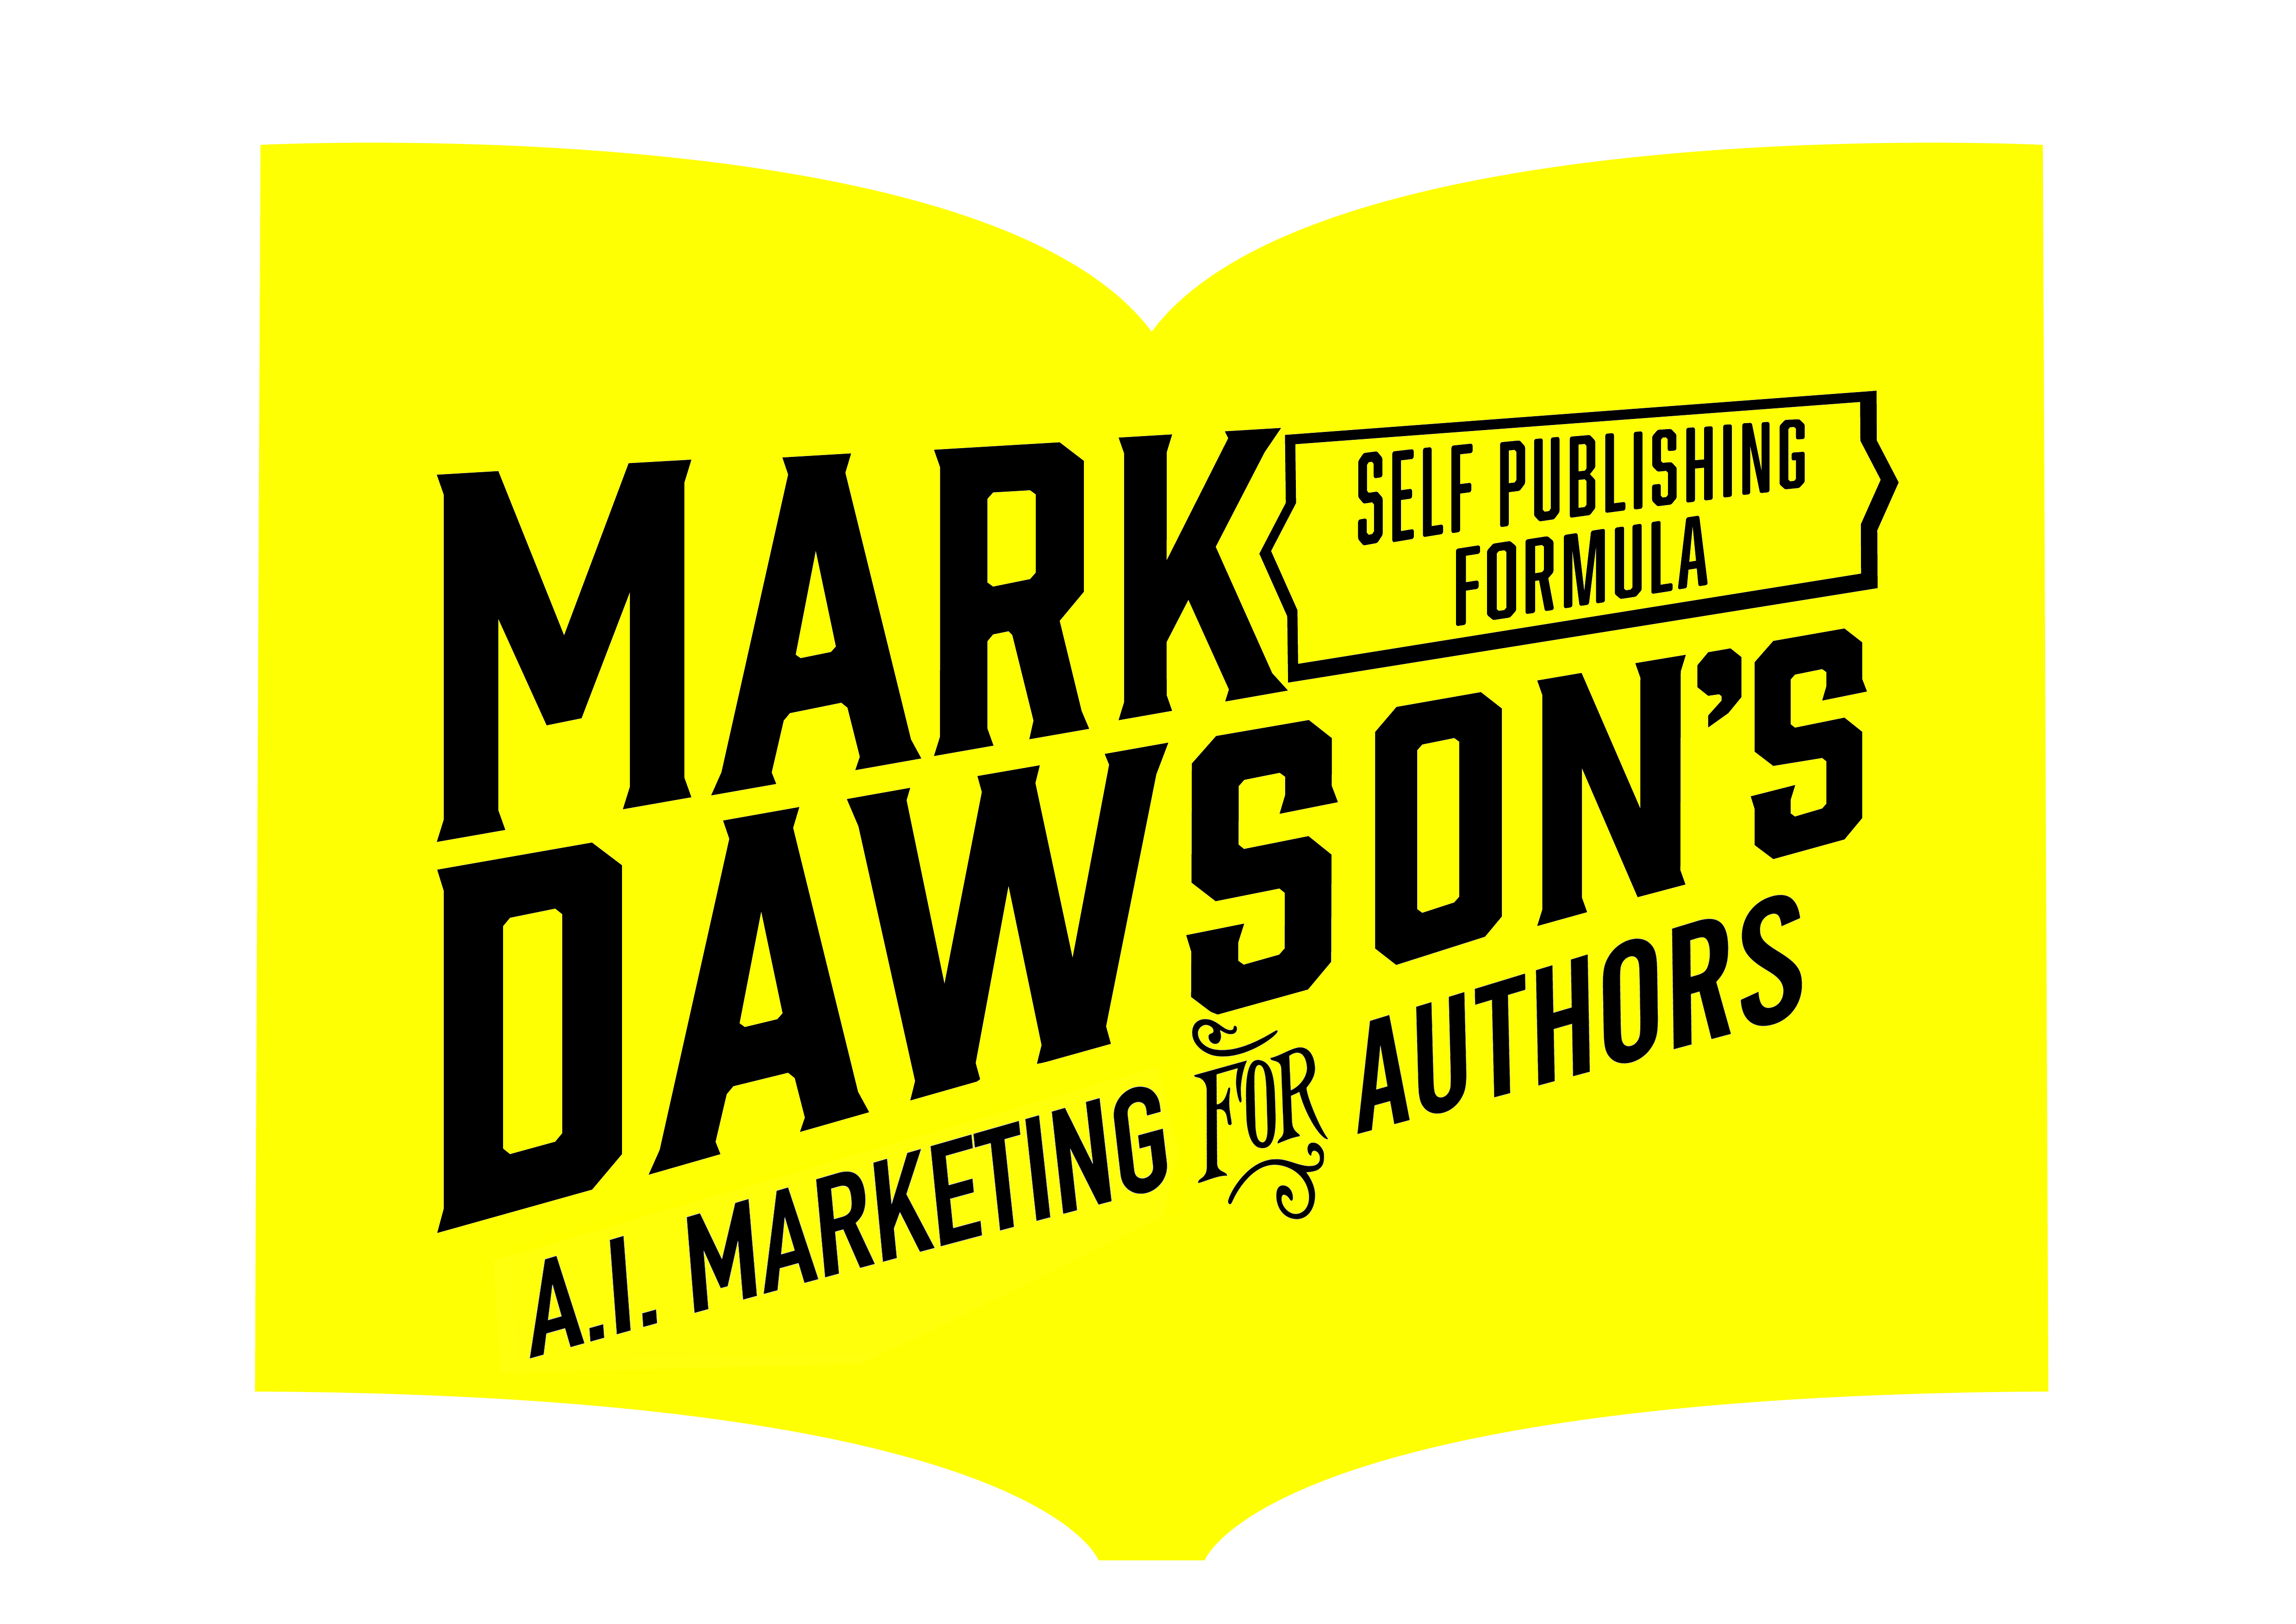 A.I. MARKETING FOR AUTHORS - BUY NOW!